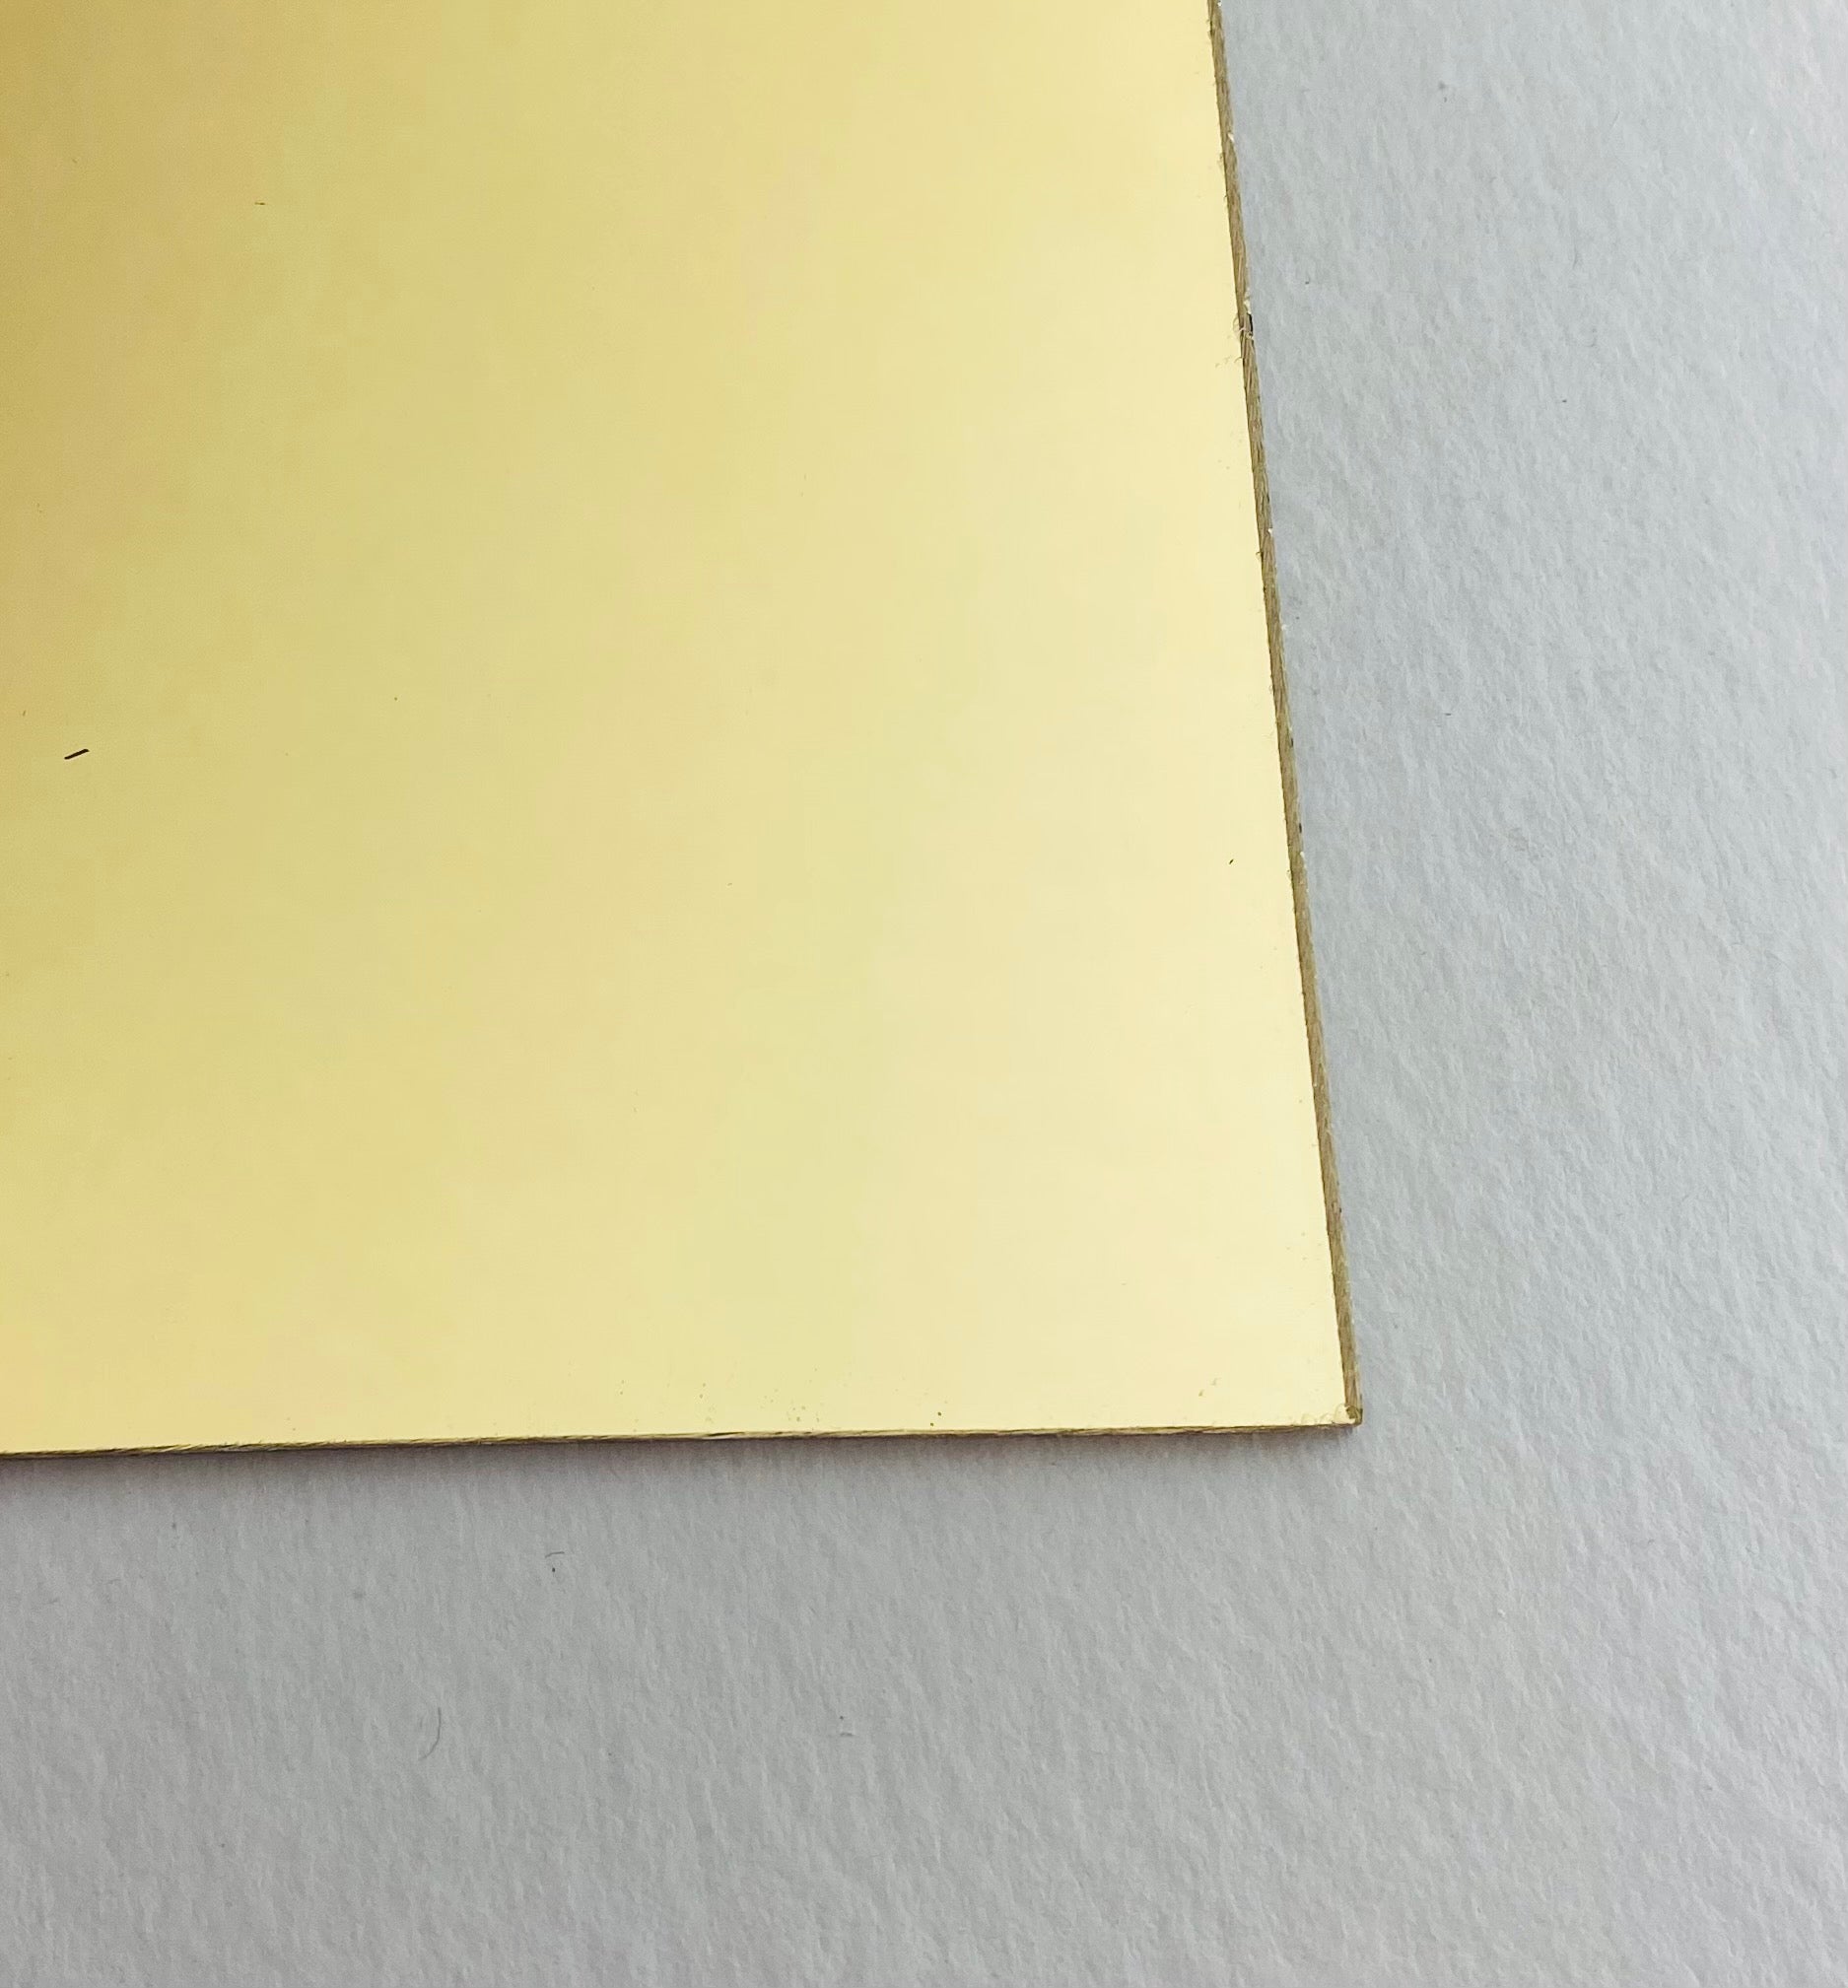 Acrylic Mirror Sheet - 12x24 - Gold - 3mm(1/8) - Laser Polished Edge  with Film Masking - Lightweight Shatter Proof Durable - Ideal for Home